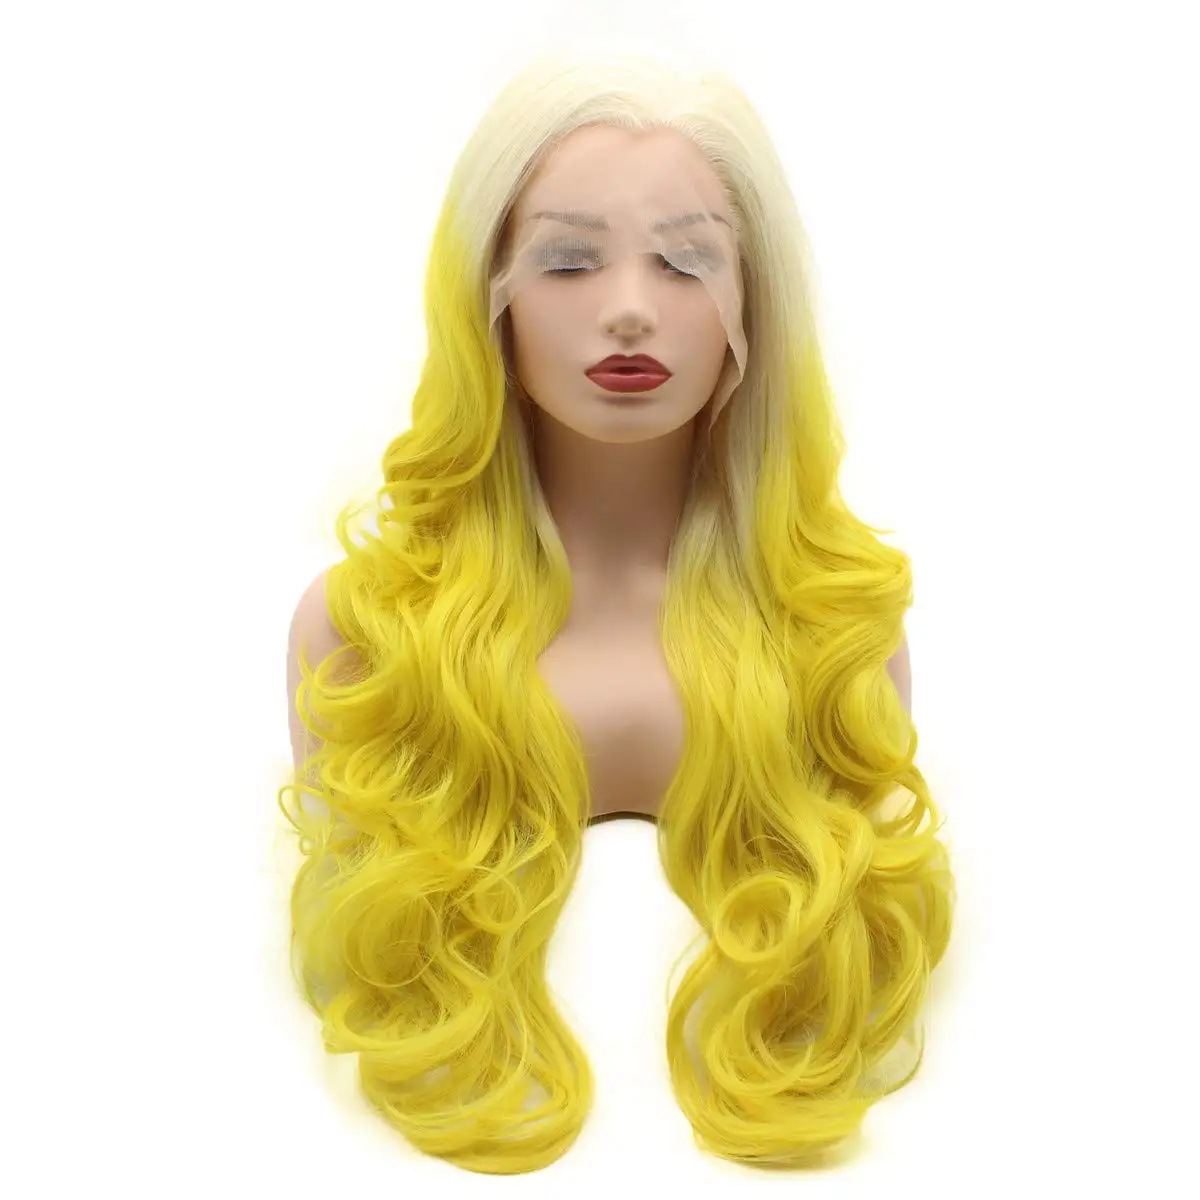 Jeelion Hair Wavy Long 26inch Blonde Root Yellow Ombre Heavy Density Realistic Synthetic Lace Front Wigs